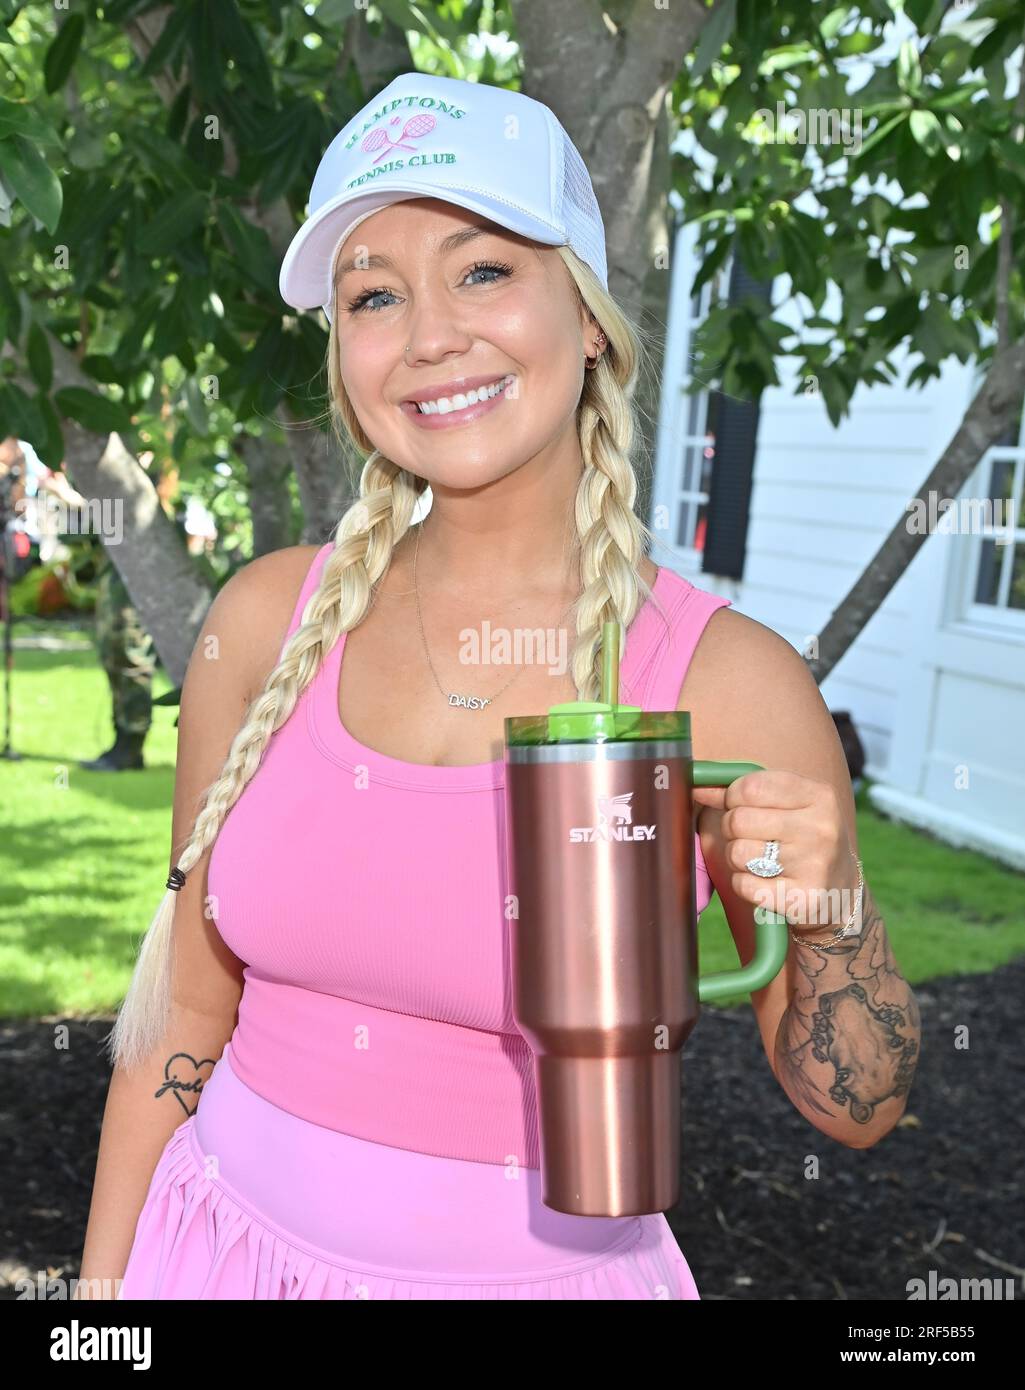 https://c8.alamy.com/comp/2RF5B55/franklin-usa-31st-july-2023-raelynn-with-her-lainey-wilson-stanley-tumbler-at-the-folds-of-honor-tennessee-3rd-annual-celebrity-golf-tournament-held-at-the-governors-club-on-july-31-2023-in-franklin-tn-tammie-arroyoaff-usacom-credit-affalamy-live-news-2RF5B55.jpg